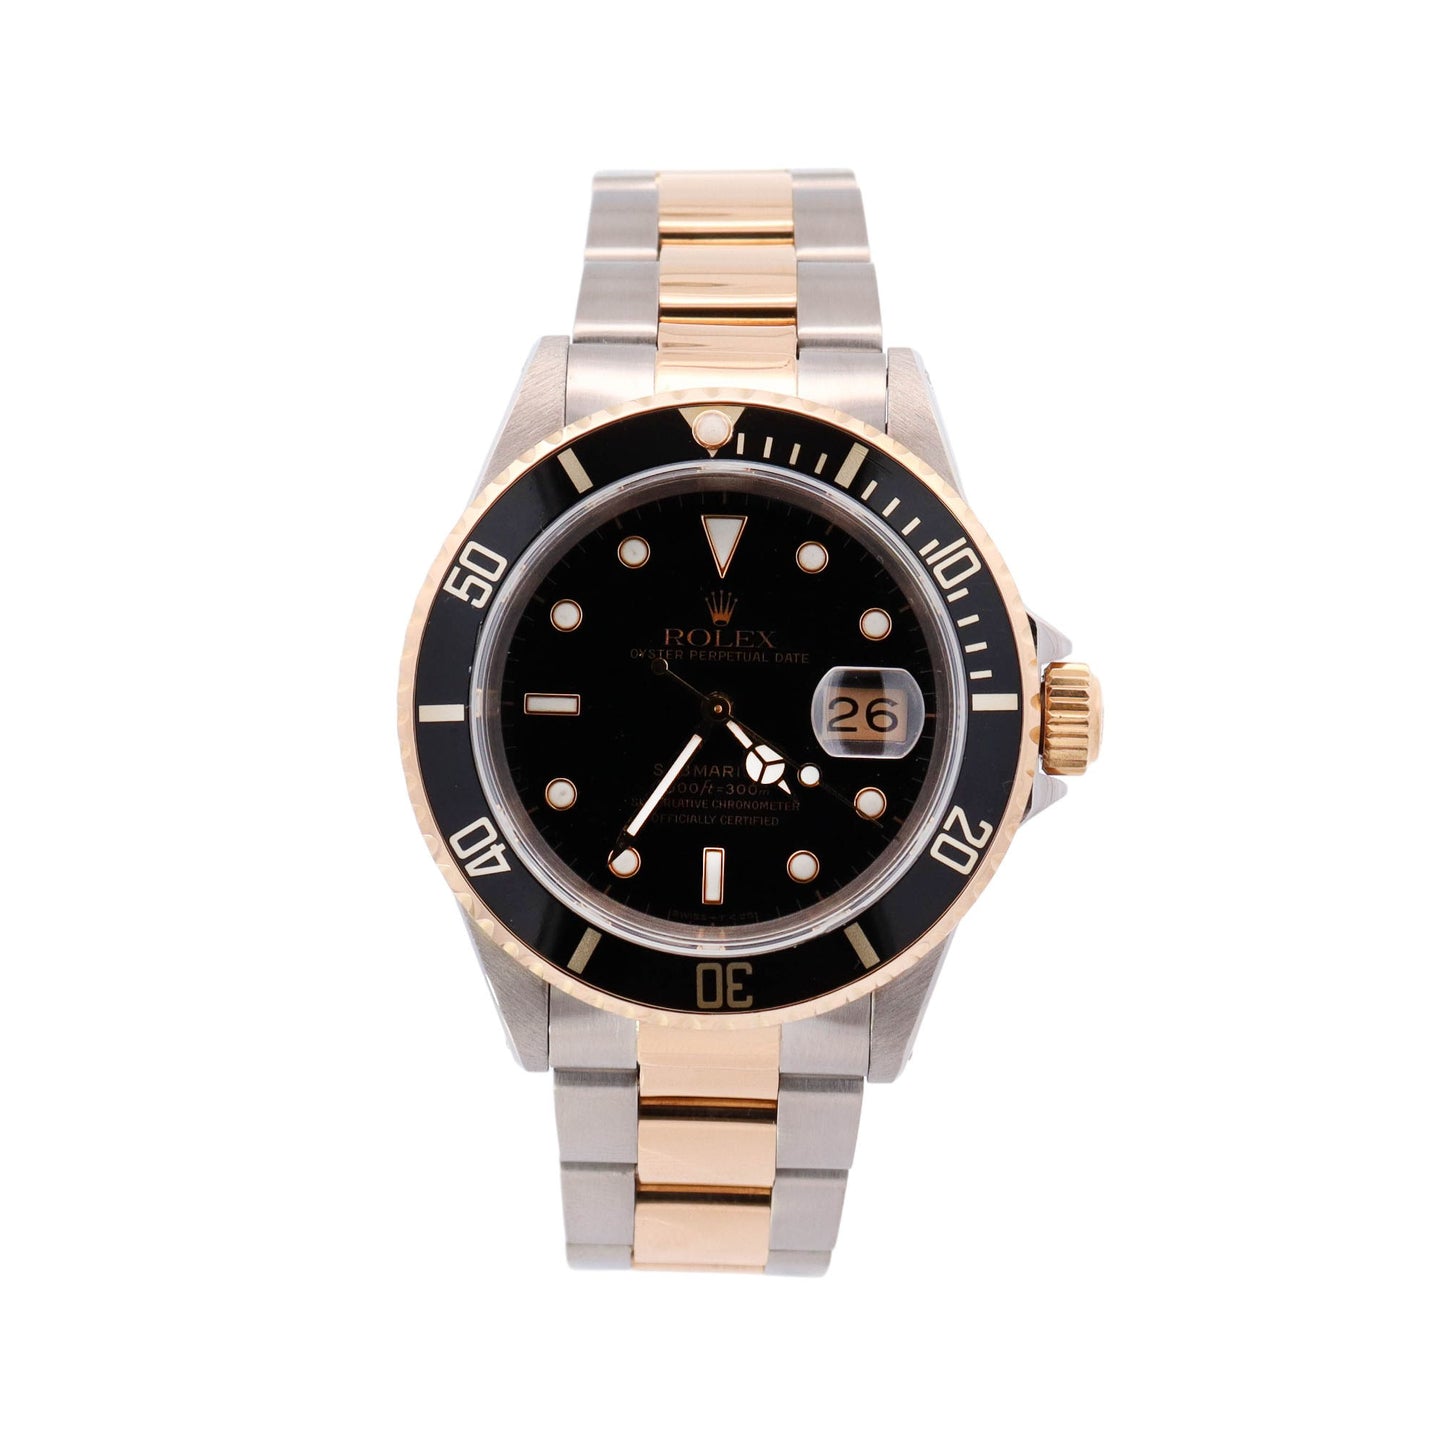 Rolex Submariner Two Tone Yellow Gold & Stainless Steel 40mm Black Dot Dial Watch Reference #: 16613LN - Happy Jewelers Fine Jewelry Lifetime Warranty